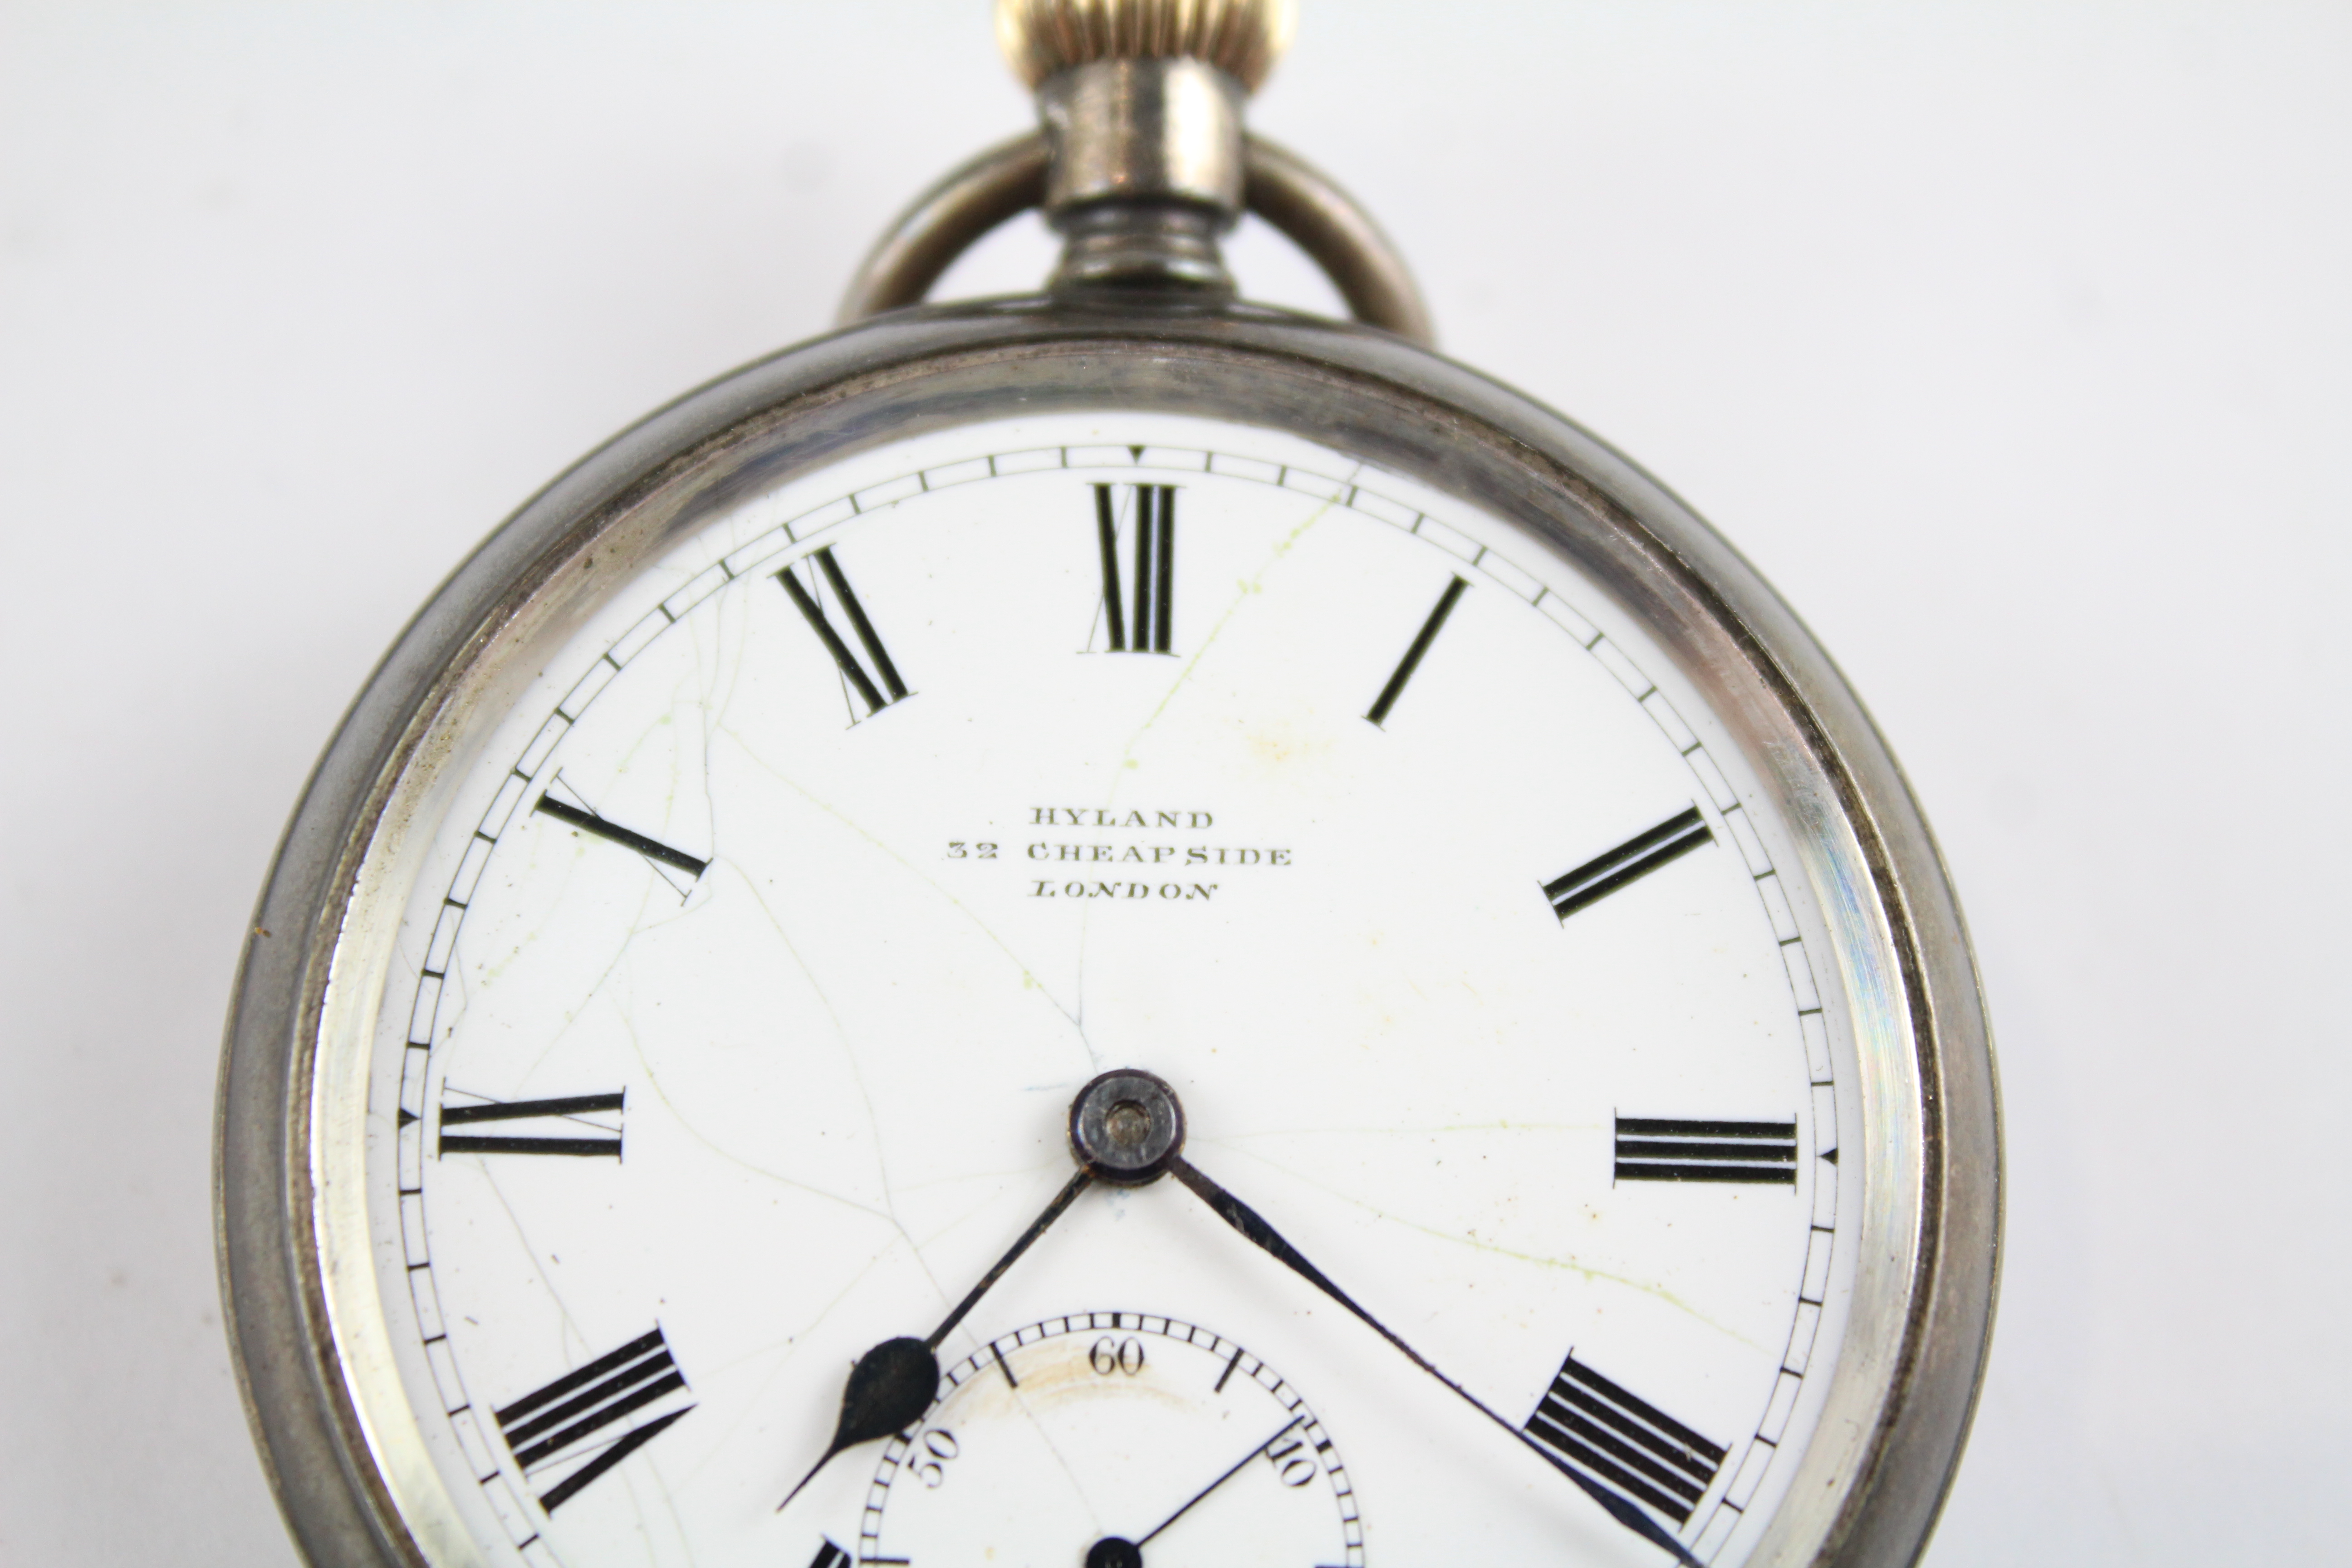 STERLING SILVER Gents Vintage Open Face POCKET WATCH Hand-Wind WORKING 404724 - Image 2 of 5